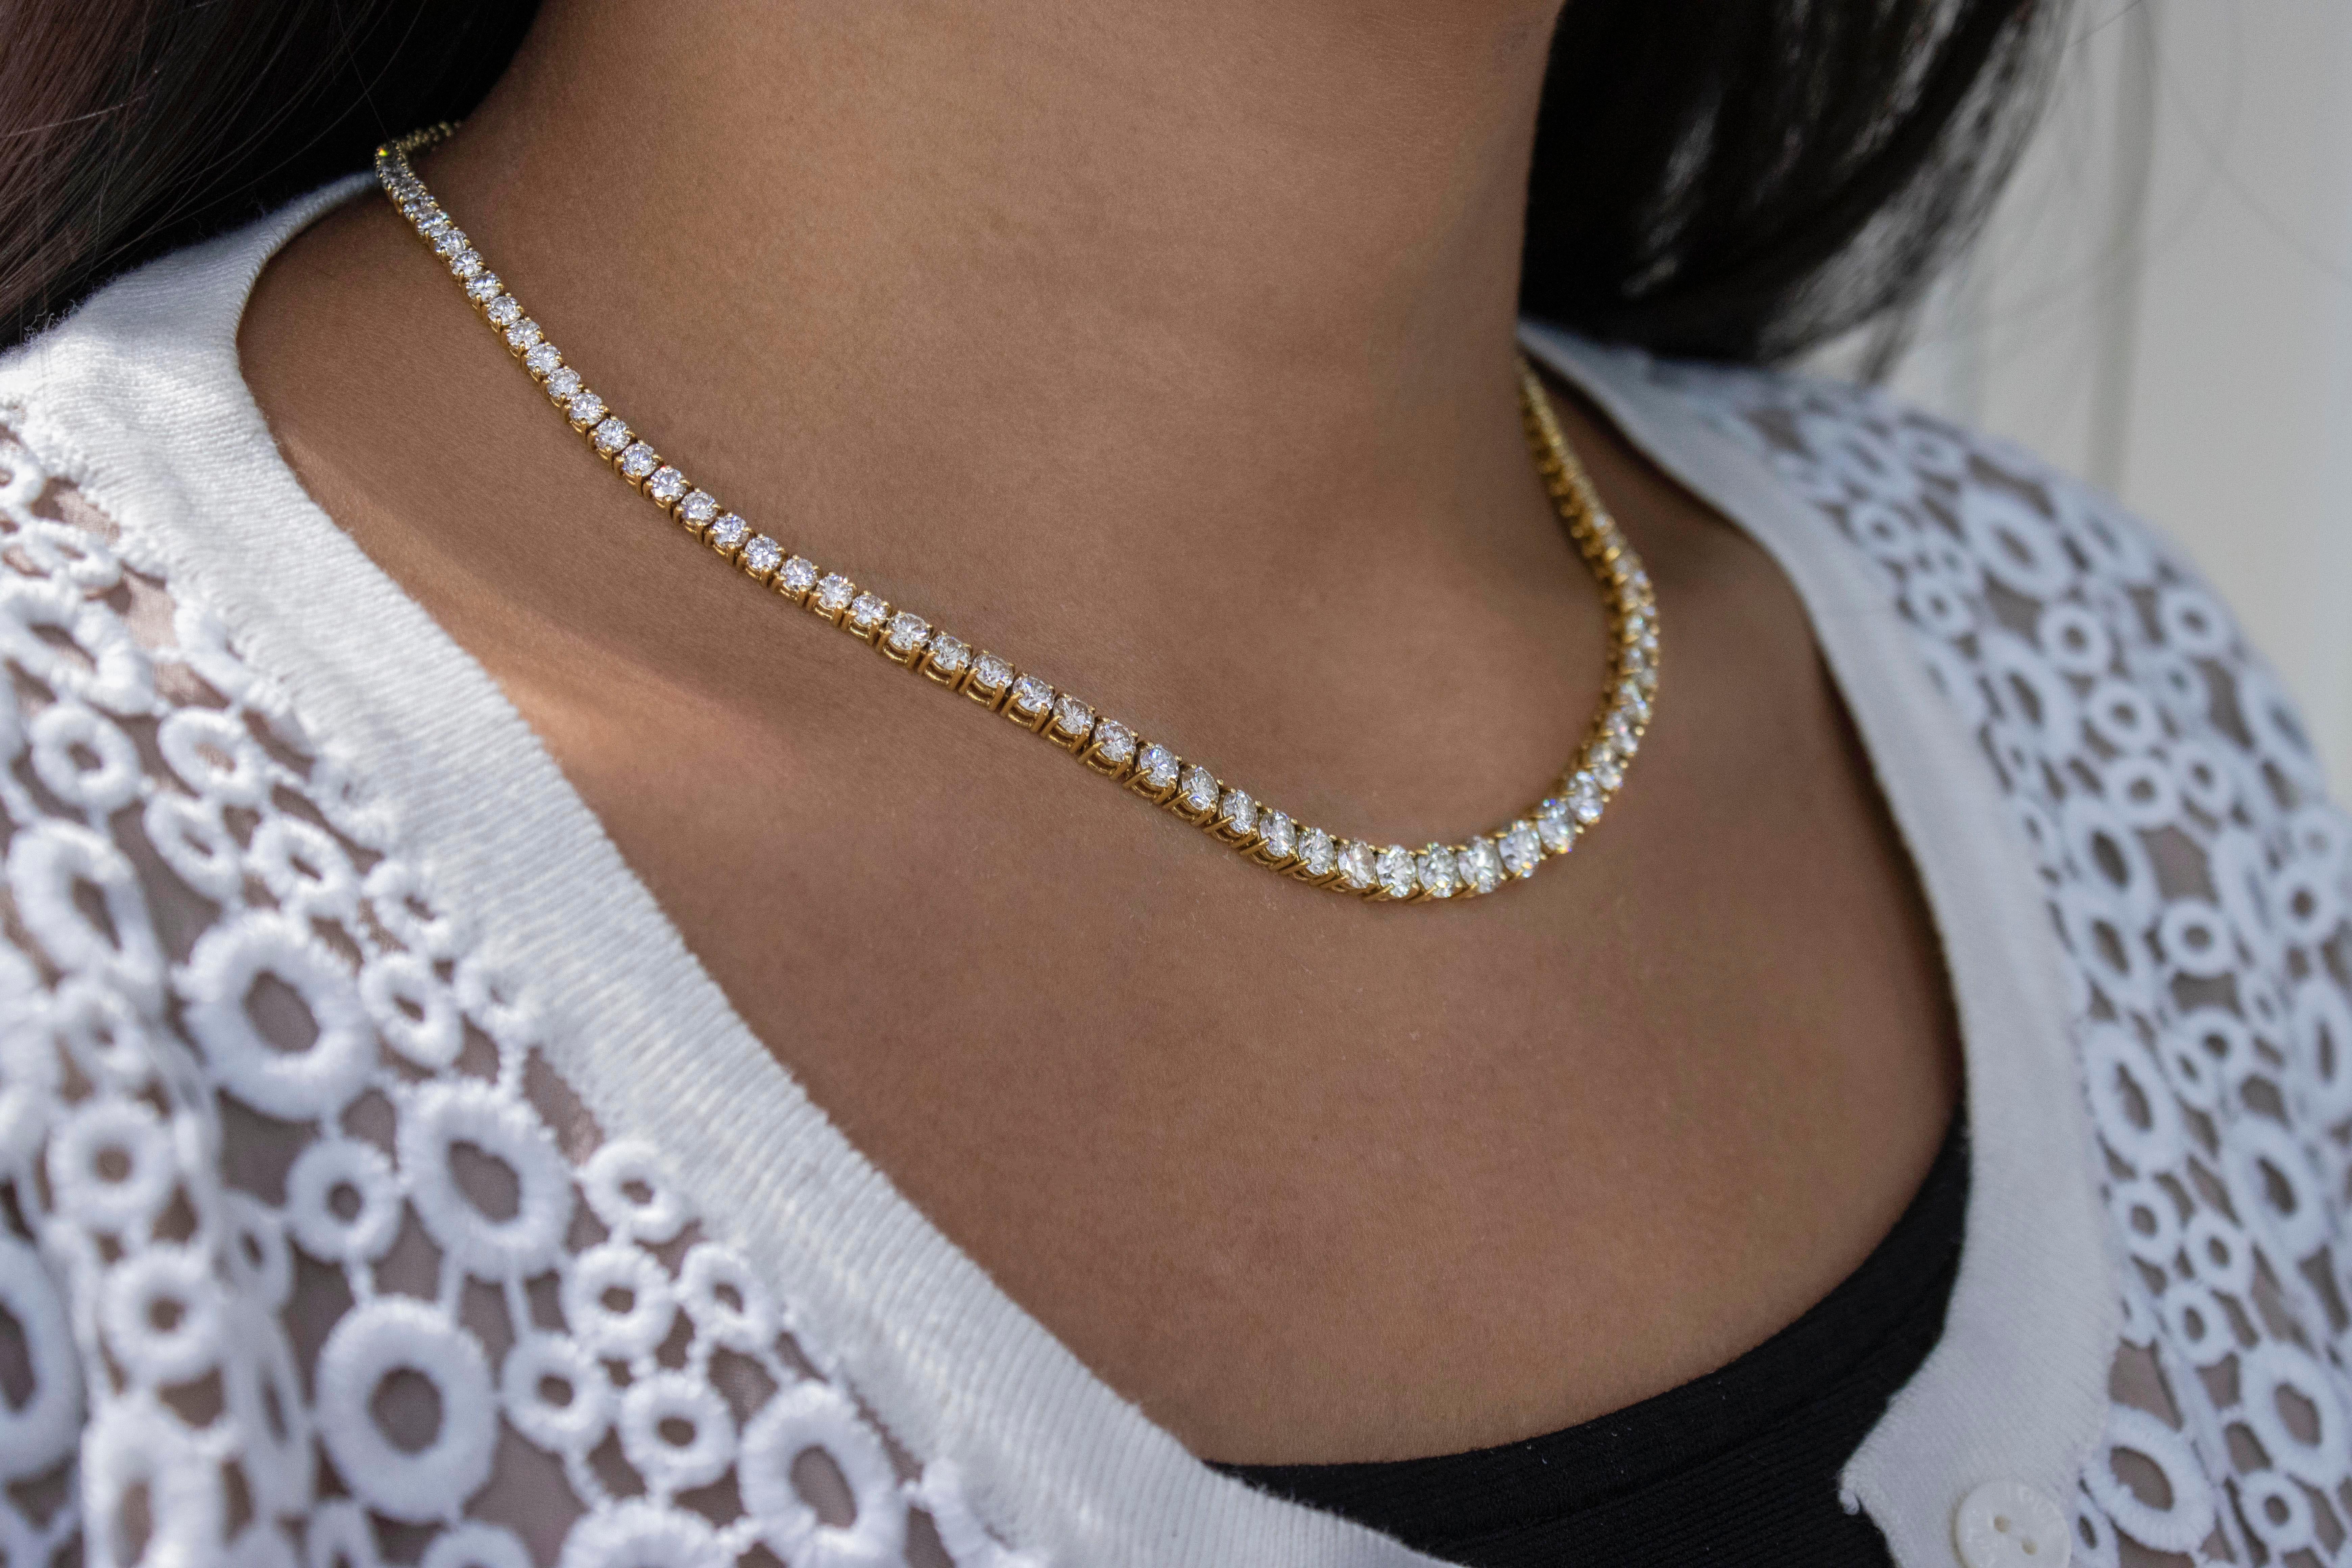 Roman Malakov 20.47 Carat Graduating Round Diamond Riviere Tennis Necklace In New Condition For Sale In New York, NY